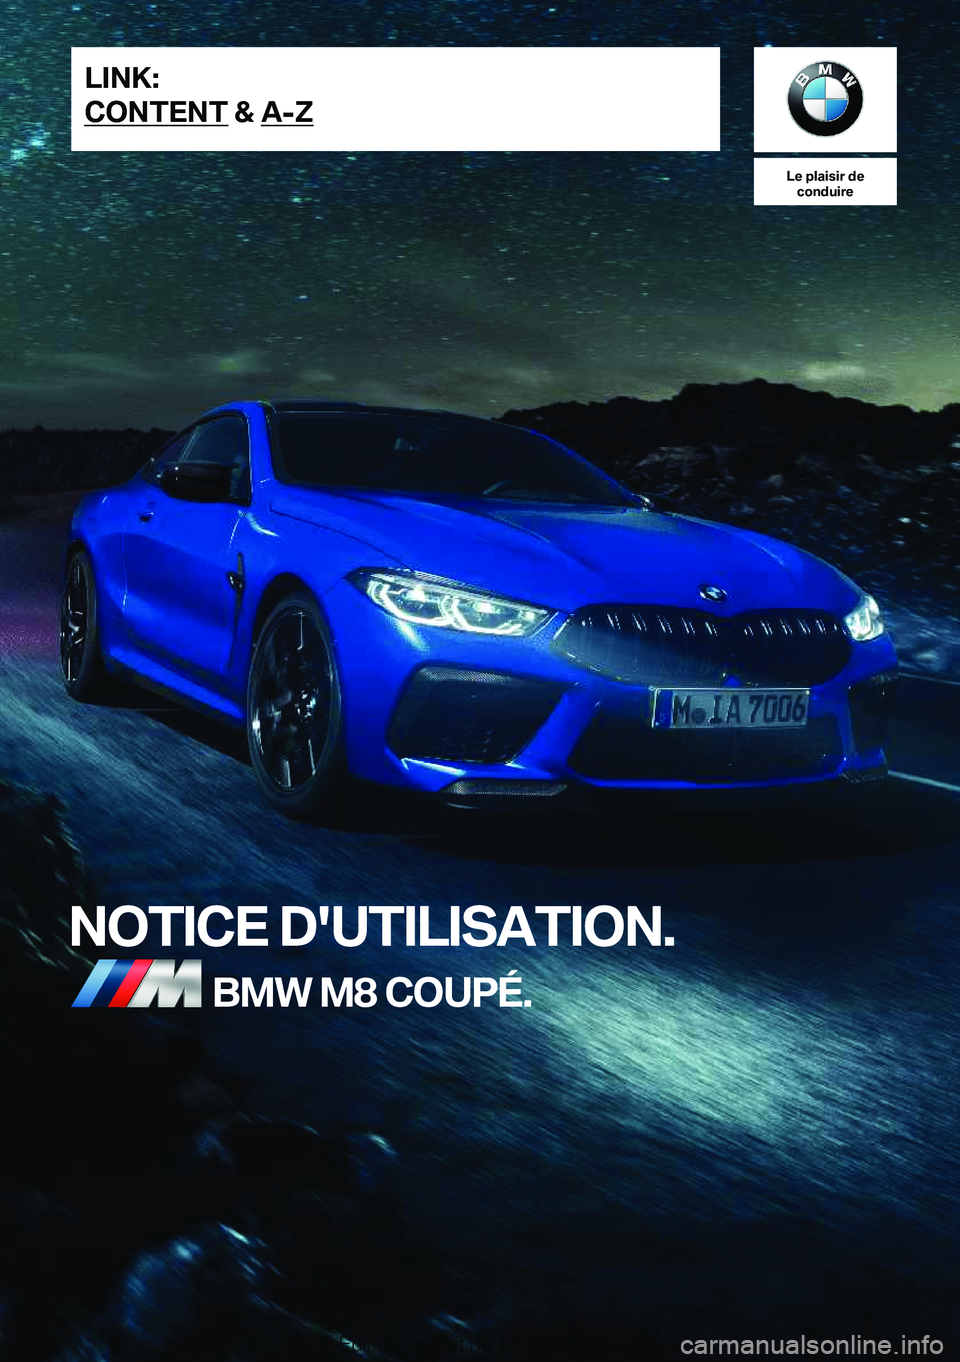 BMW M8 2020  Notices Demploi (in French) �L�e��p�l�a�i�s�i�r��d�e�c�o�n�d�u�i�r�e
�N�O�T�I�C�E��D�'�U�T�I�L�I�S�A�T�I�O�N�.�B�M�W��M�8��C�O�U�P�